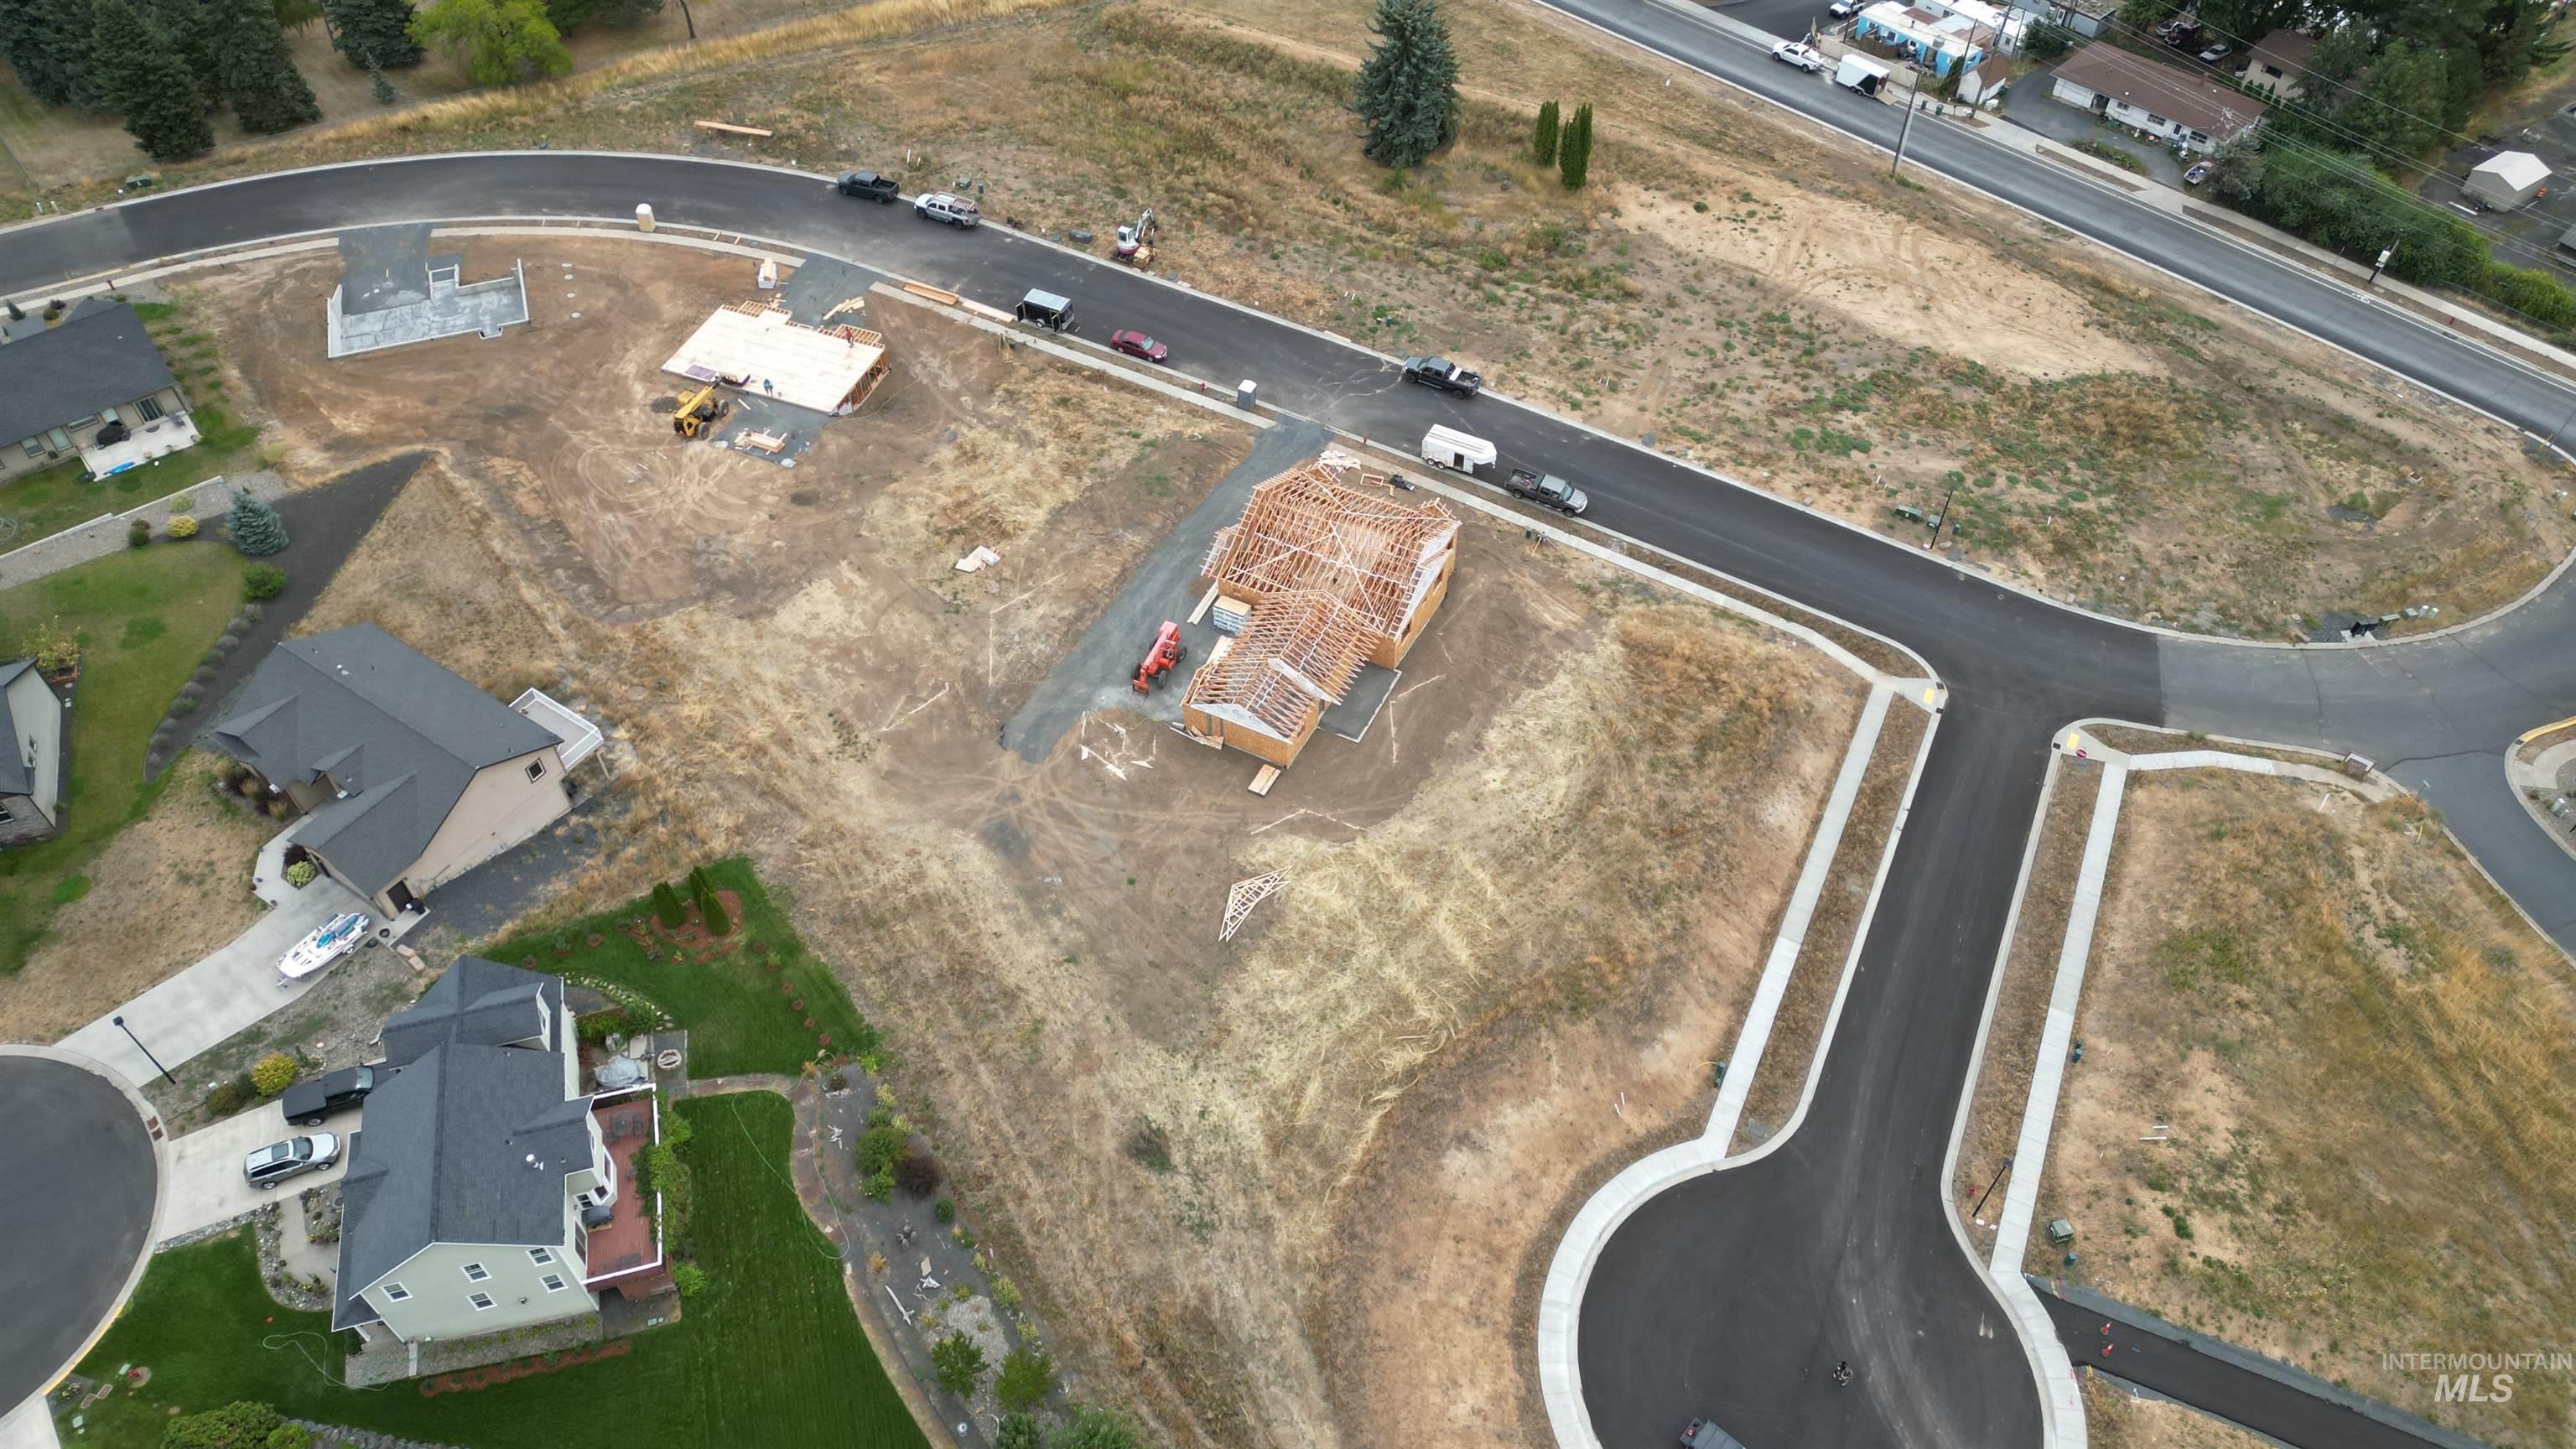 2018 Ben Gifford Court, Moscow, Idaho 83843, Land For Sale, Price $155,000,MLS 98888759